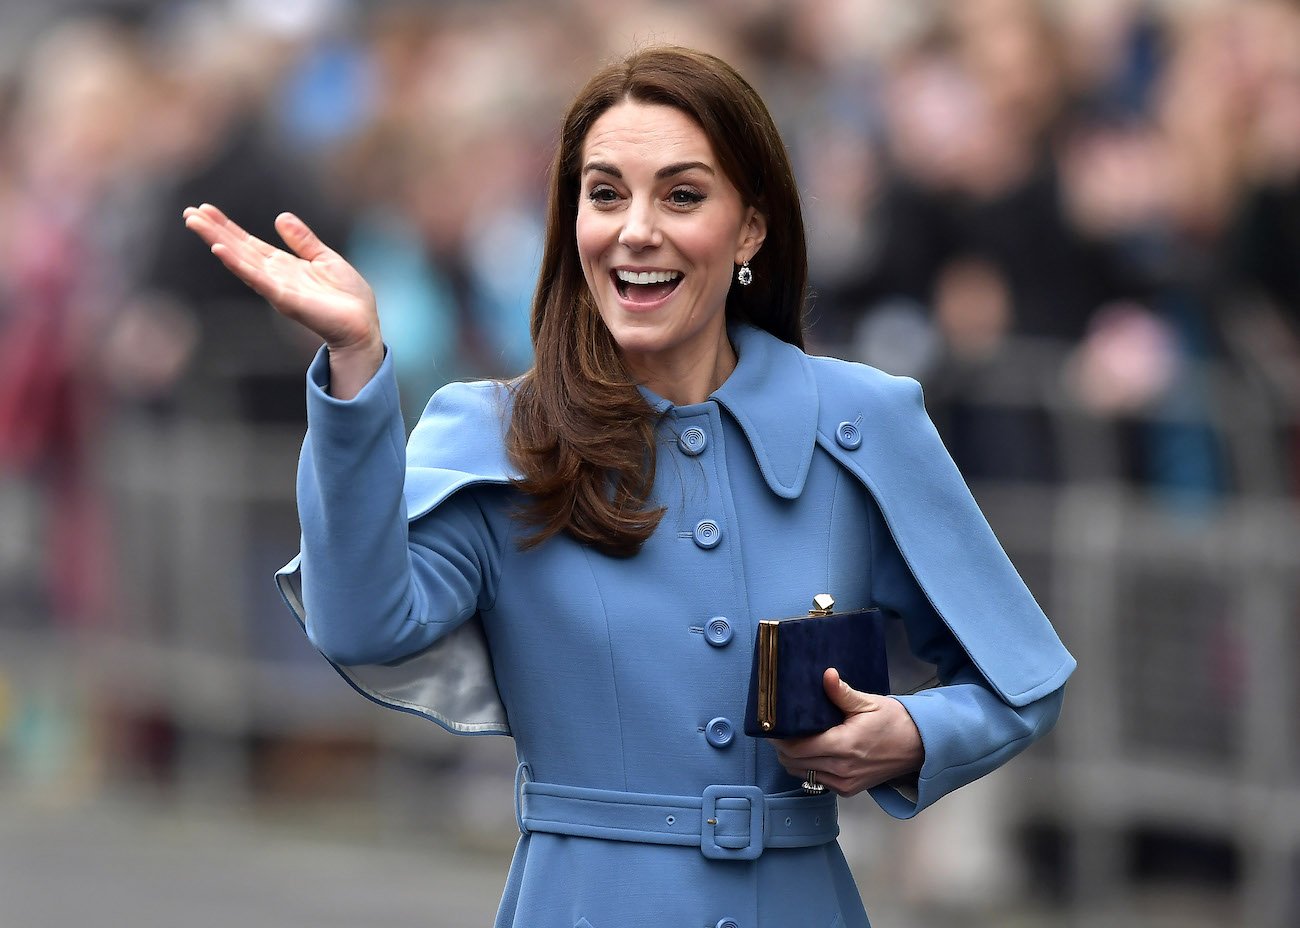 Kate Middleton waving with her right hand while wearing a blue coat